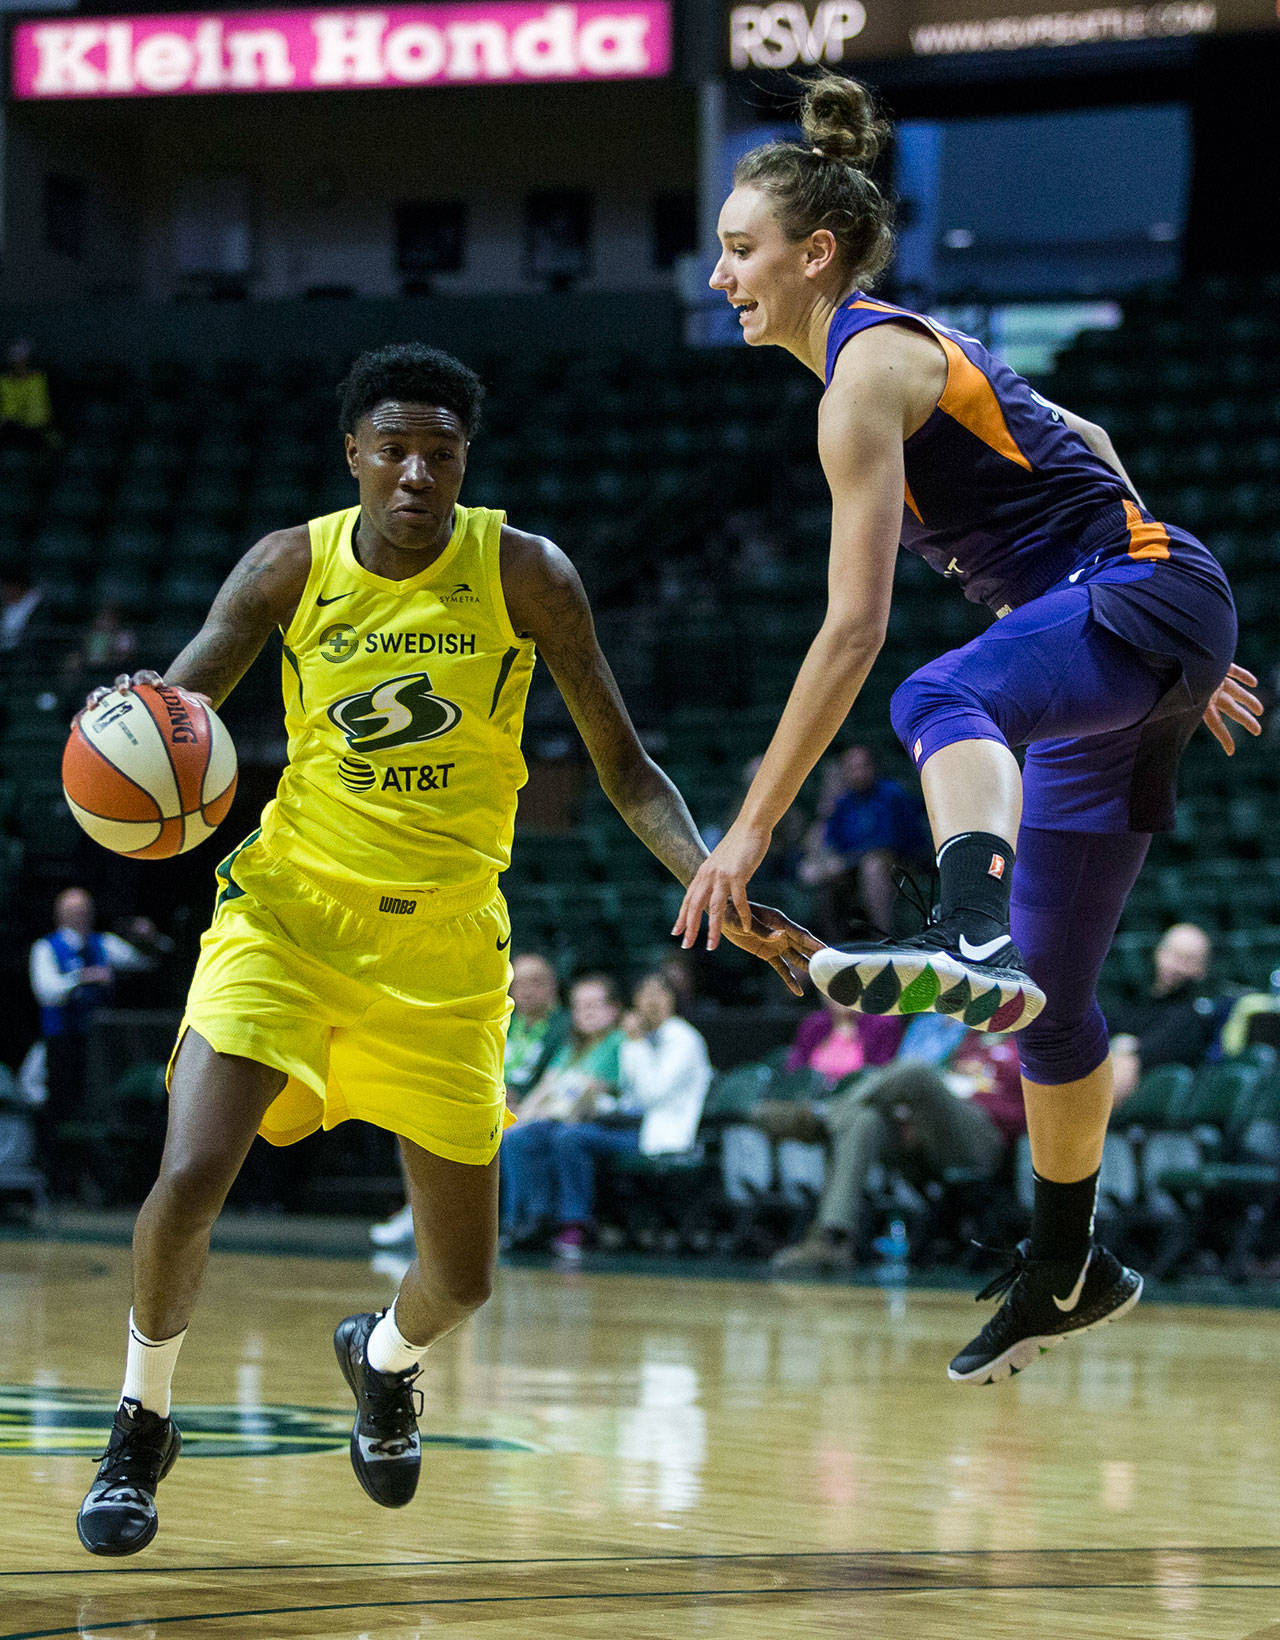 Seattle’s Natasha Howard dribbles around Phoenix’s Stephanie Talbot during a preseason game against Phoenix on Wednesday at Angel of the Winds Arena in Everett. (Olivia Vanni / The Herald)